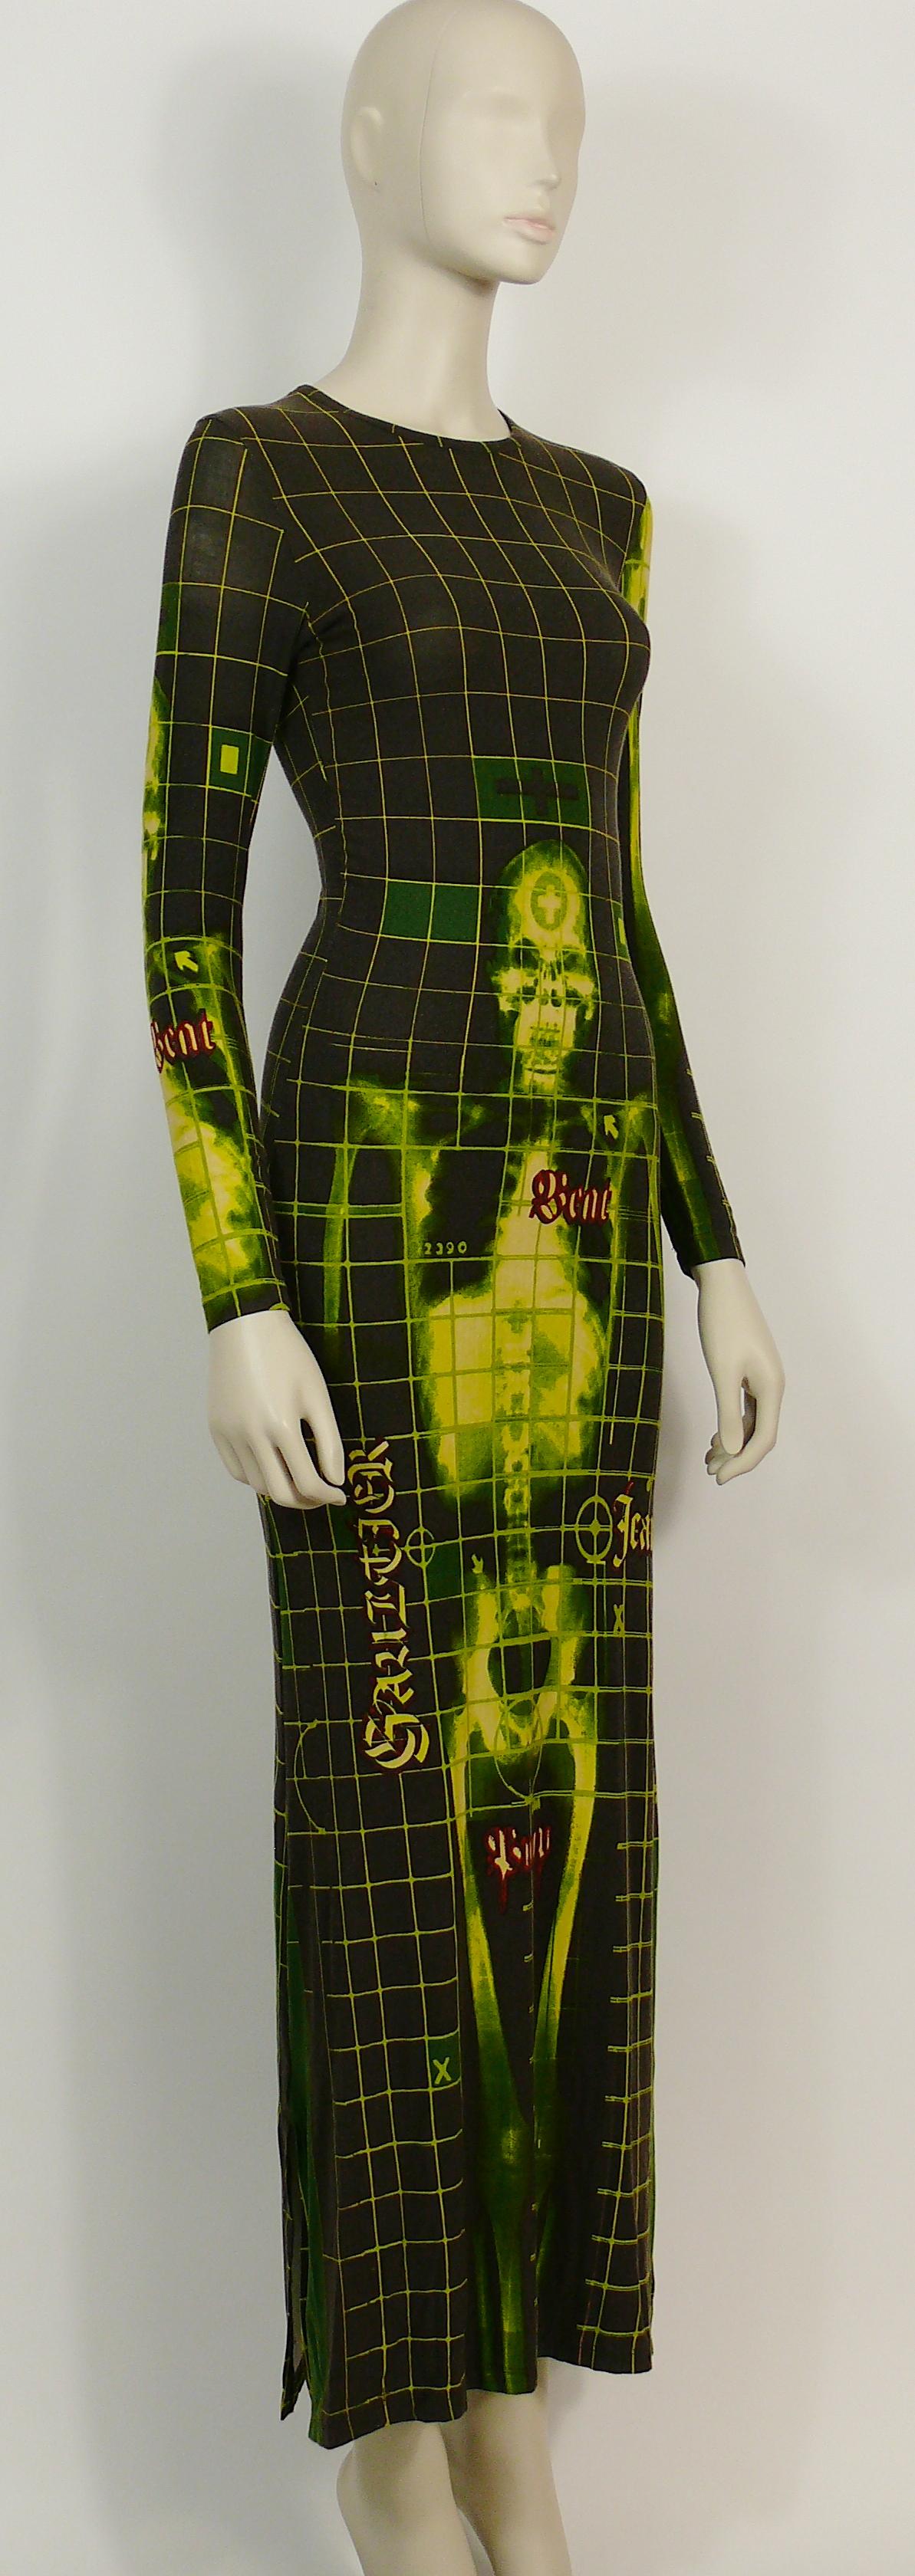 JEAN PAUL GAULTIER vintage rare X-Ray skeleton print maxi dress featuring a round neck, long sleeves and cut detailing to the sides.

Slips on.

Label reads GAULTIER JEAN'S.

Missing size label.
Photographied on a 36-38 (XS-S) mannequin.
Please